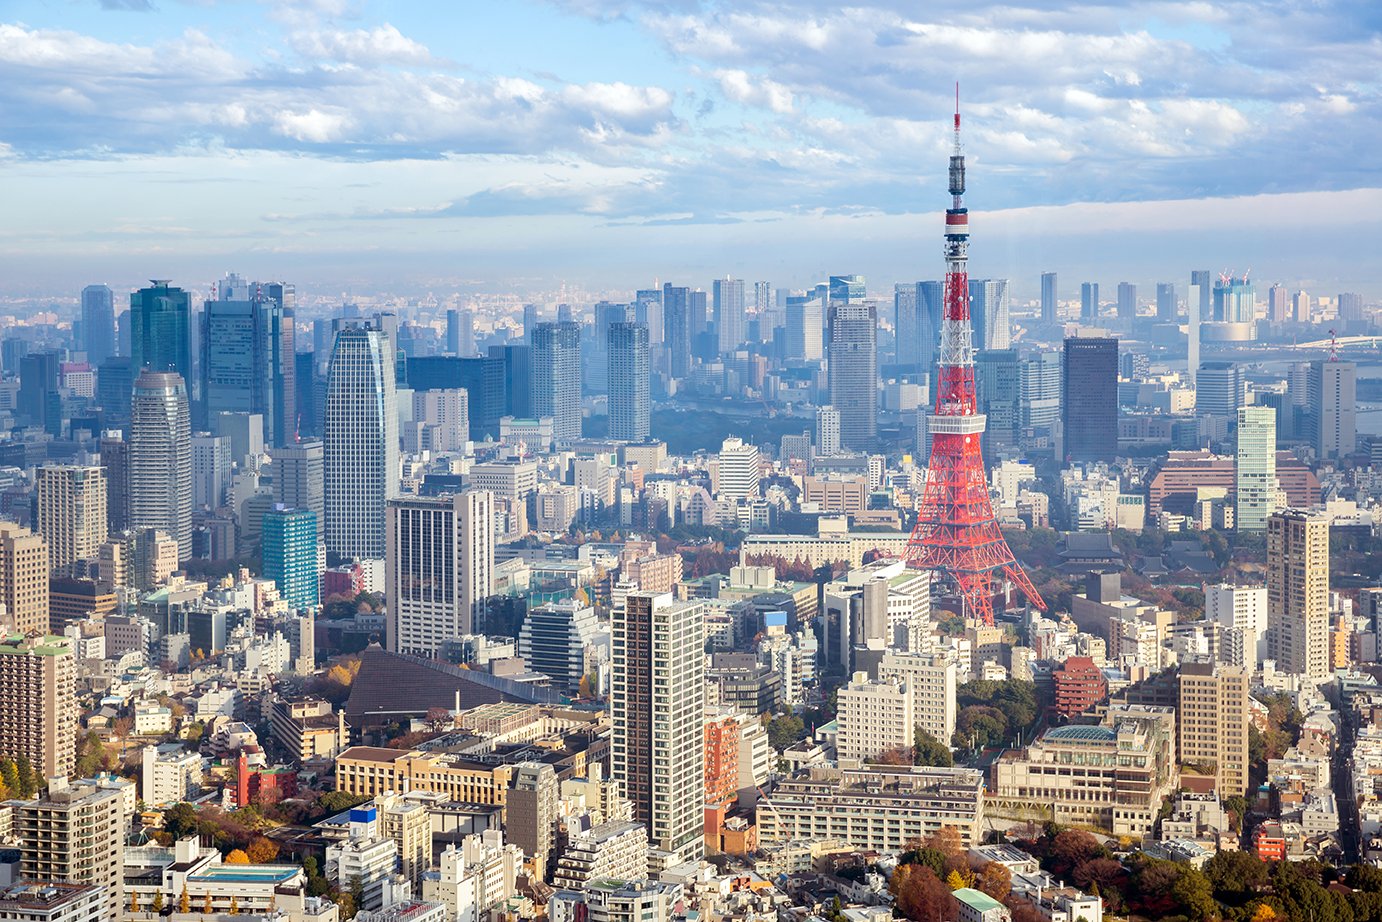 The fund makes its first real estate investments in Asia, acquiring 70 percent of five properties in Tokyo.